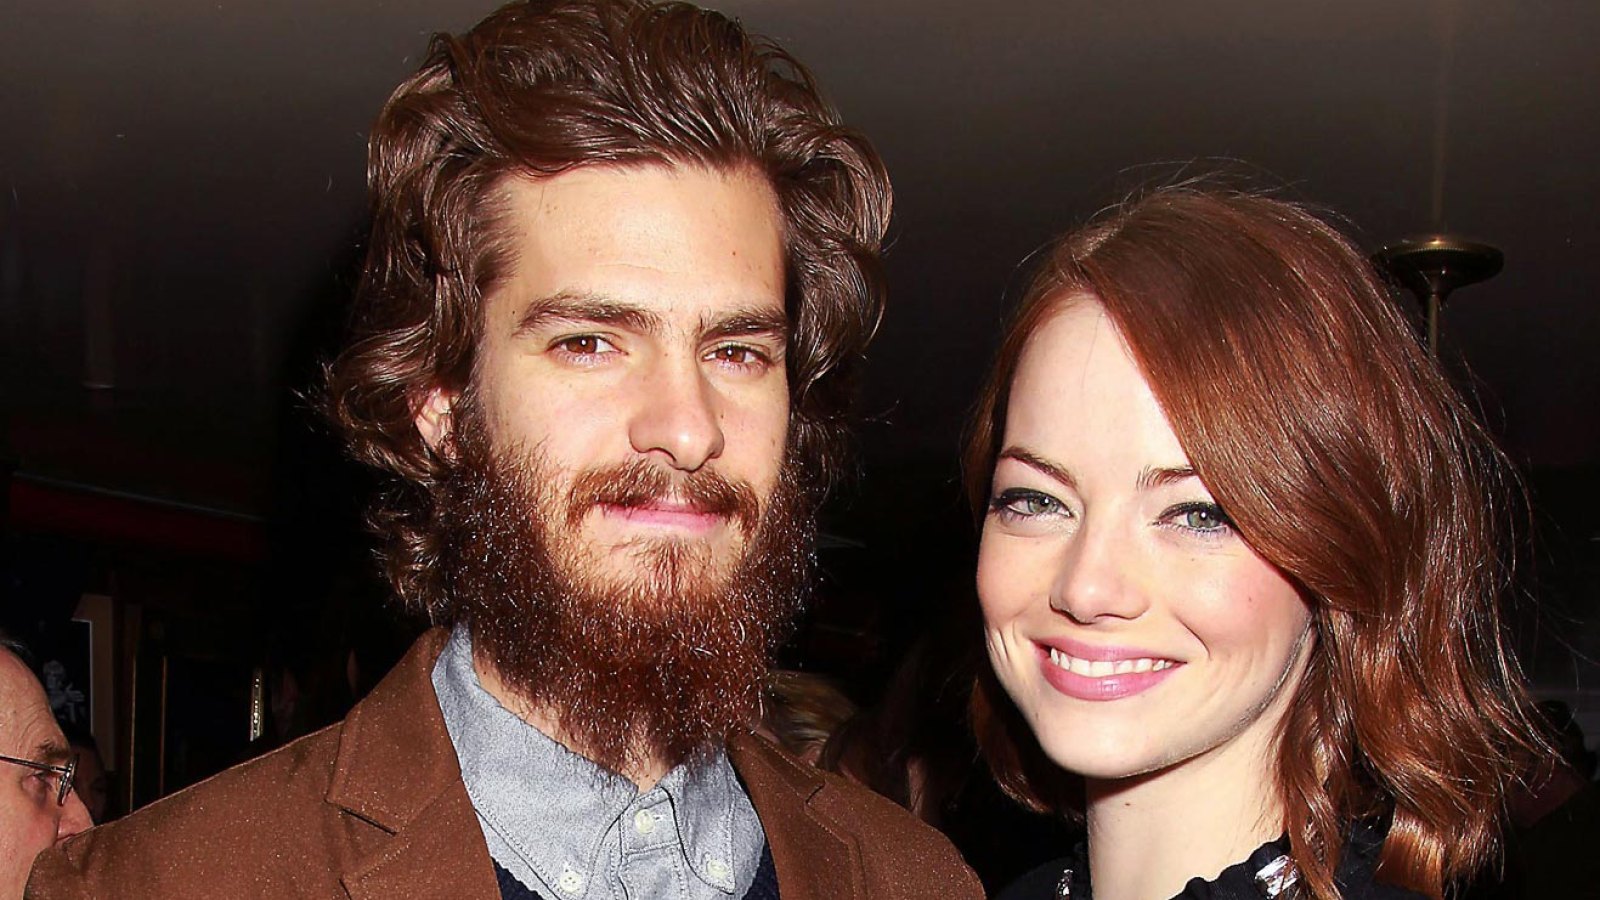 Emma Stone and Andrew Garfield: The Way They Were